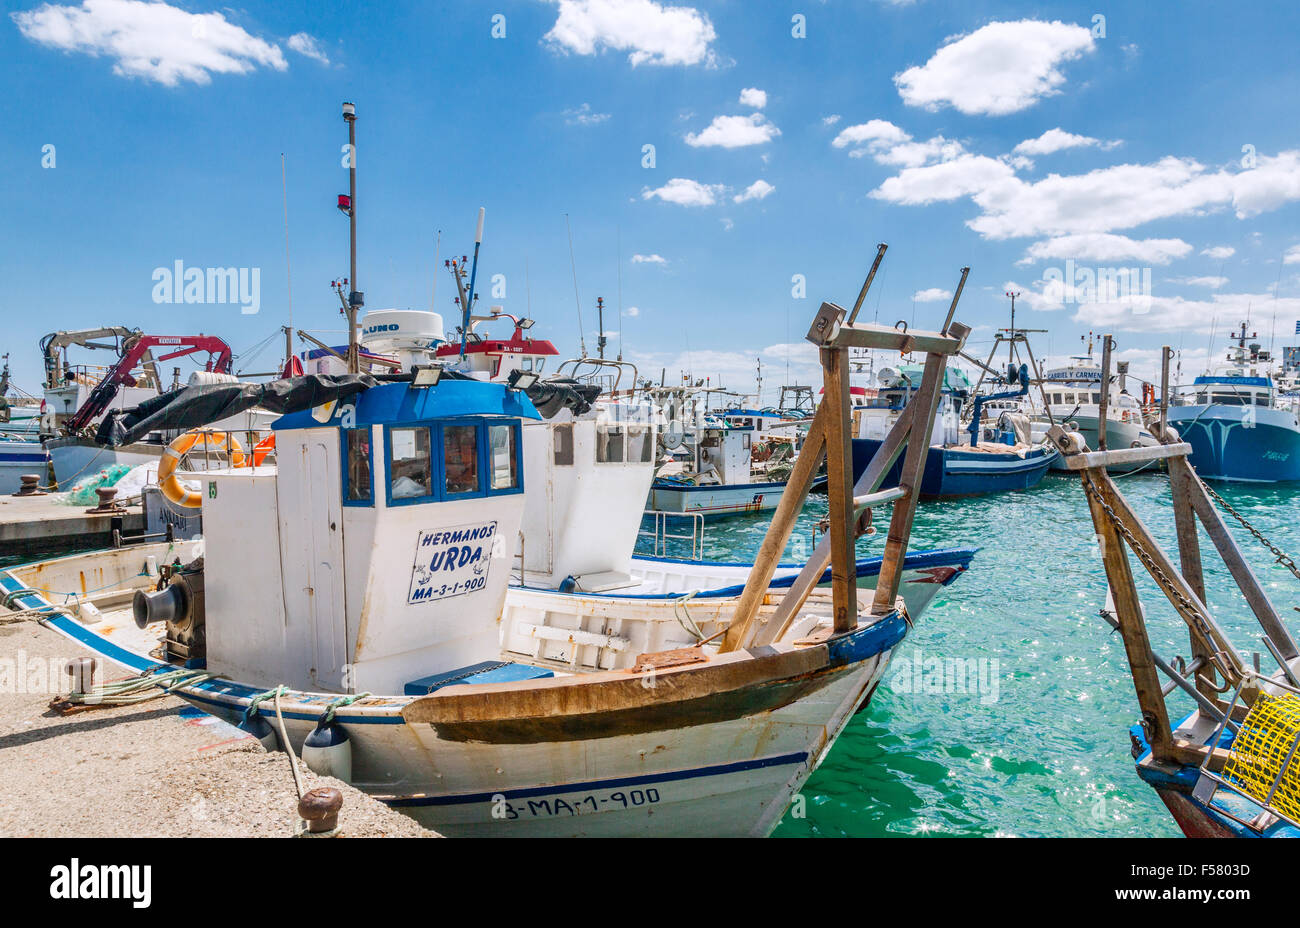 Spain, Andalusia, Málaga Province, Costa del Sol Oriental, fishing trawlers in the harbour of the coastal town Caleta de Vélez Stock Photo